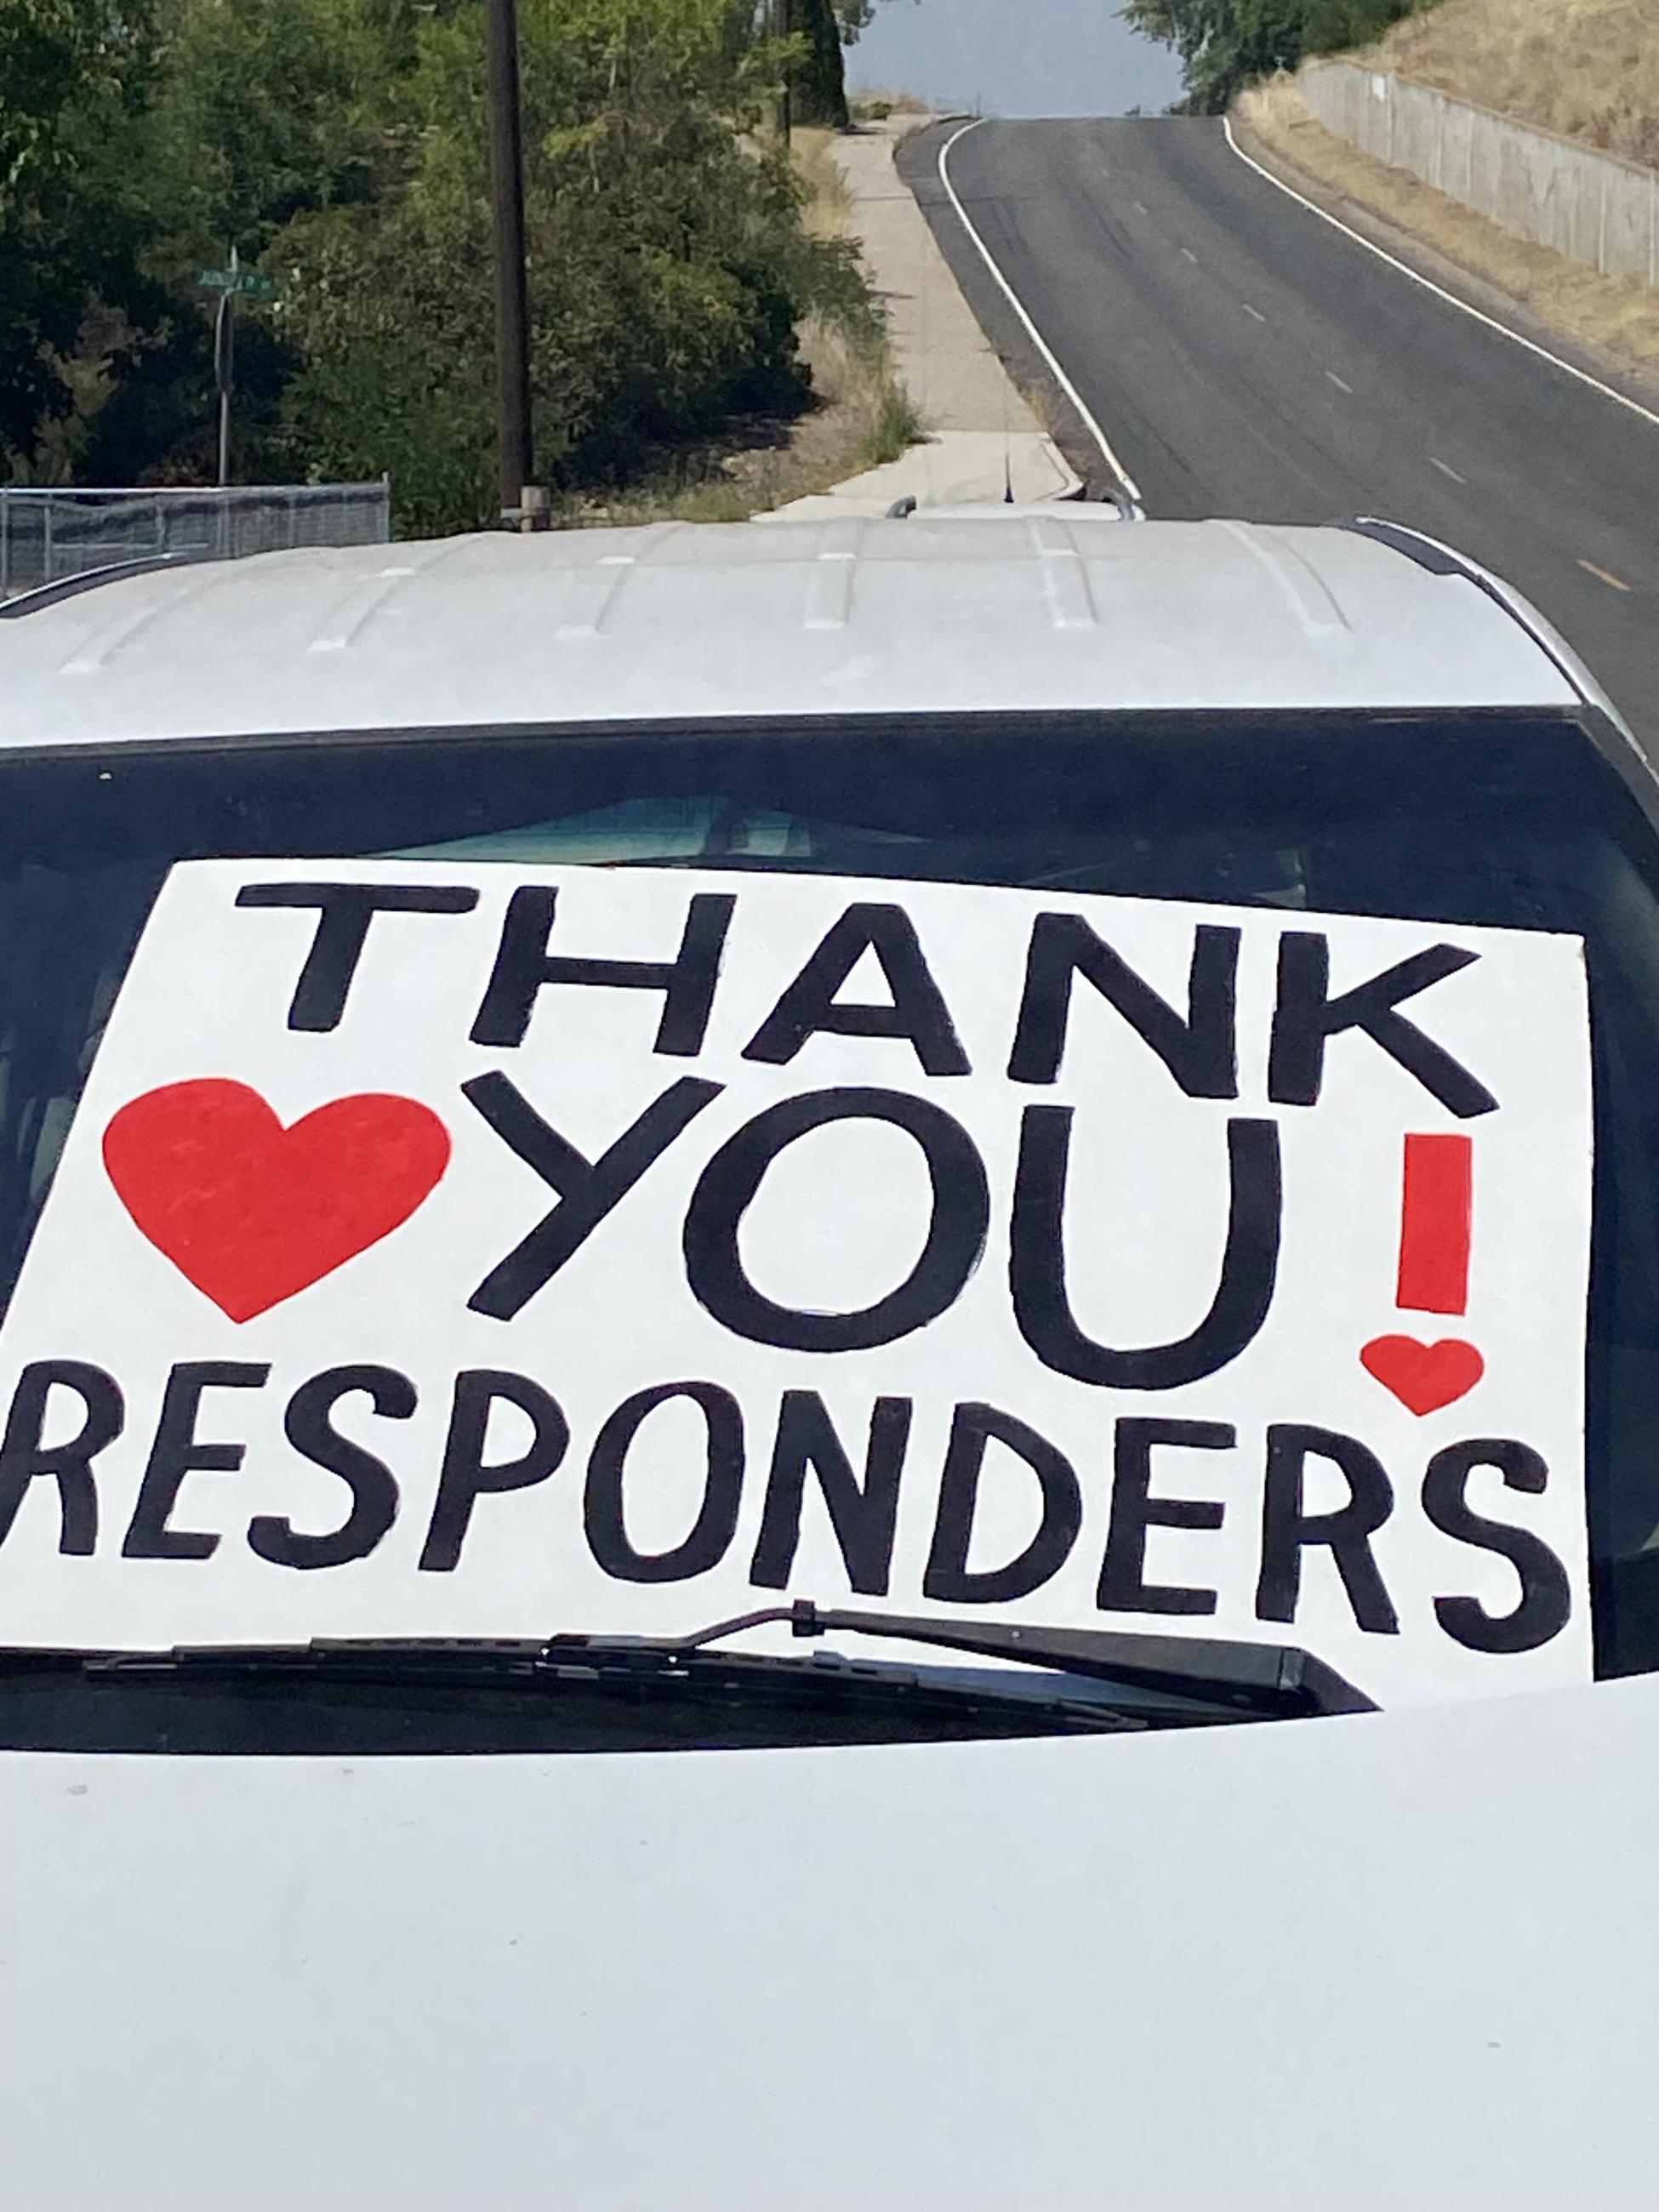 A sign that someone has placed in the windshield of their car reads "Thank you responders" with hearts.